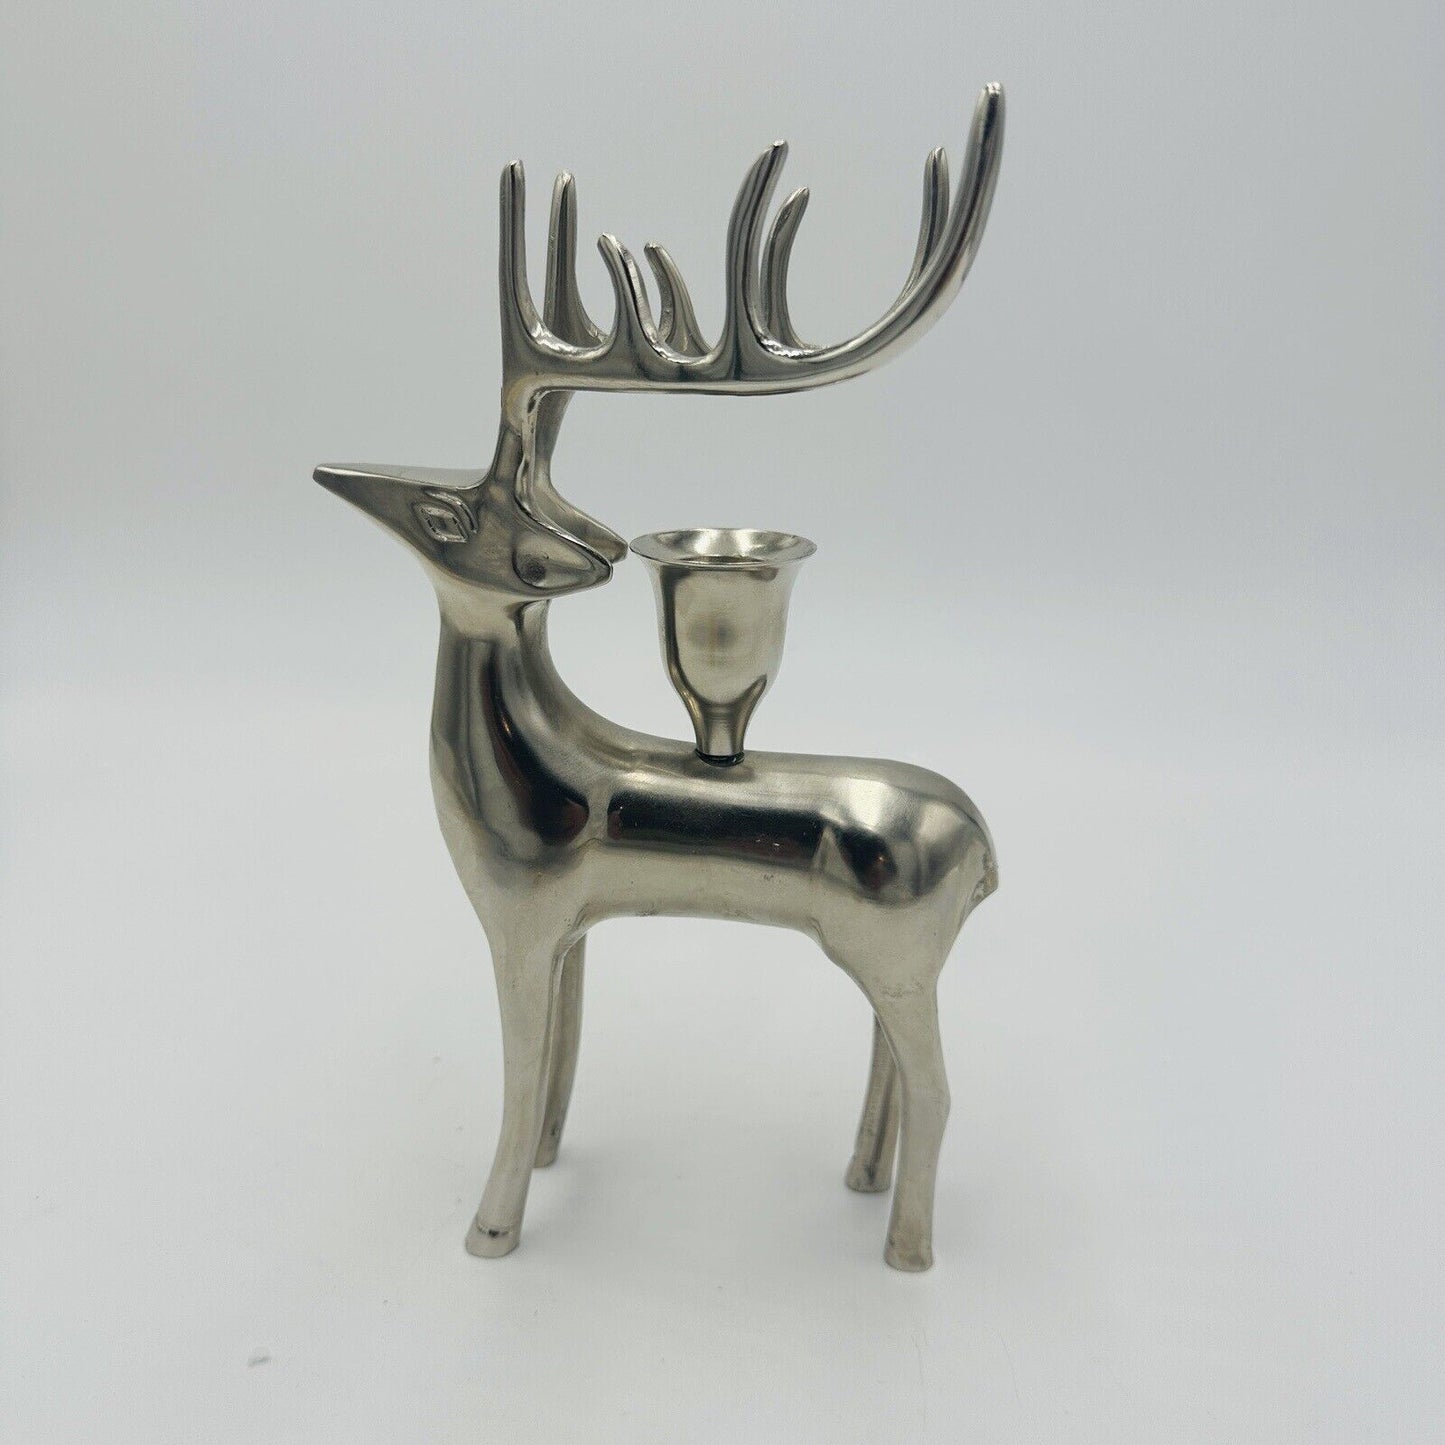 Pottery Barn Vintage Silver Plated Reindeer Taper Candle Holders Seasonal Stag